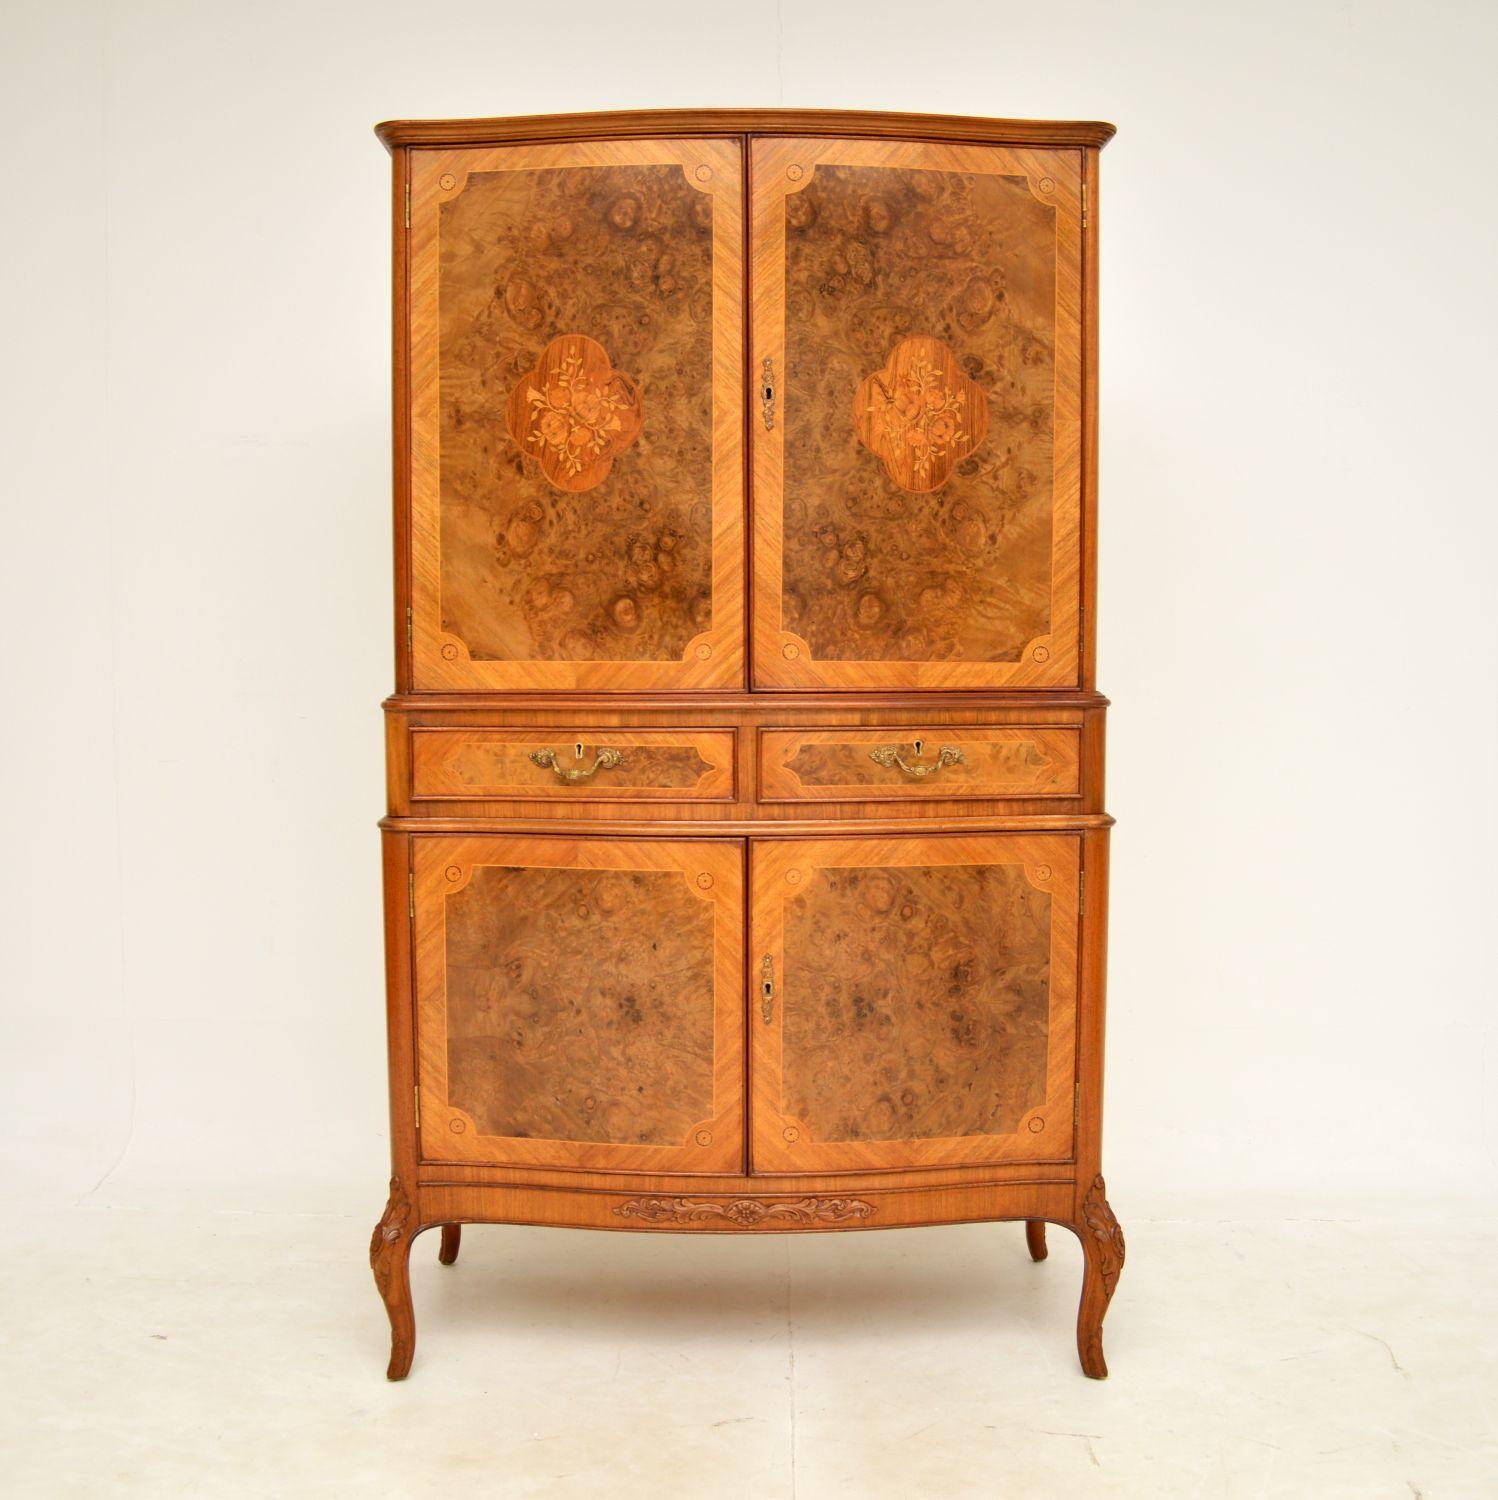 A beautiful and impressive inlaid walnut drinks cabinet in the antique French style, dating from around the 1930's period.

The quality is amazing, this is extremely well made with many fine features. It is made from a combination of burr walnut,